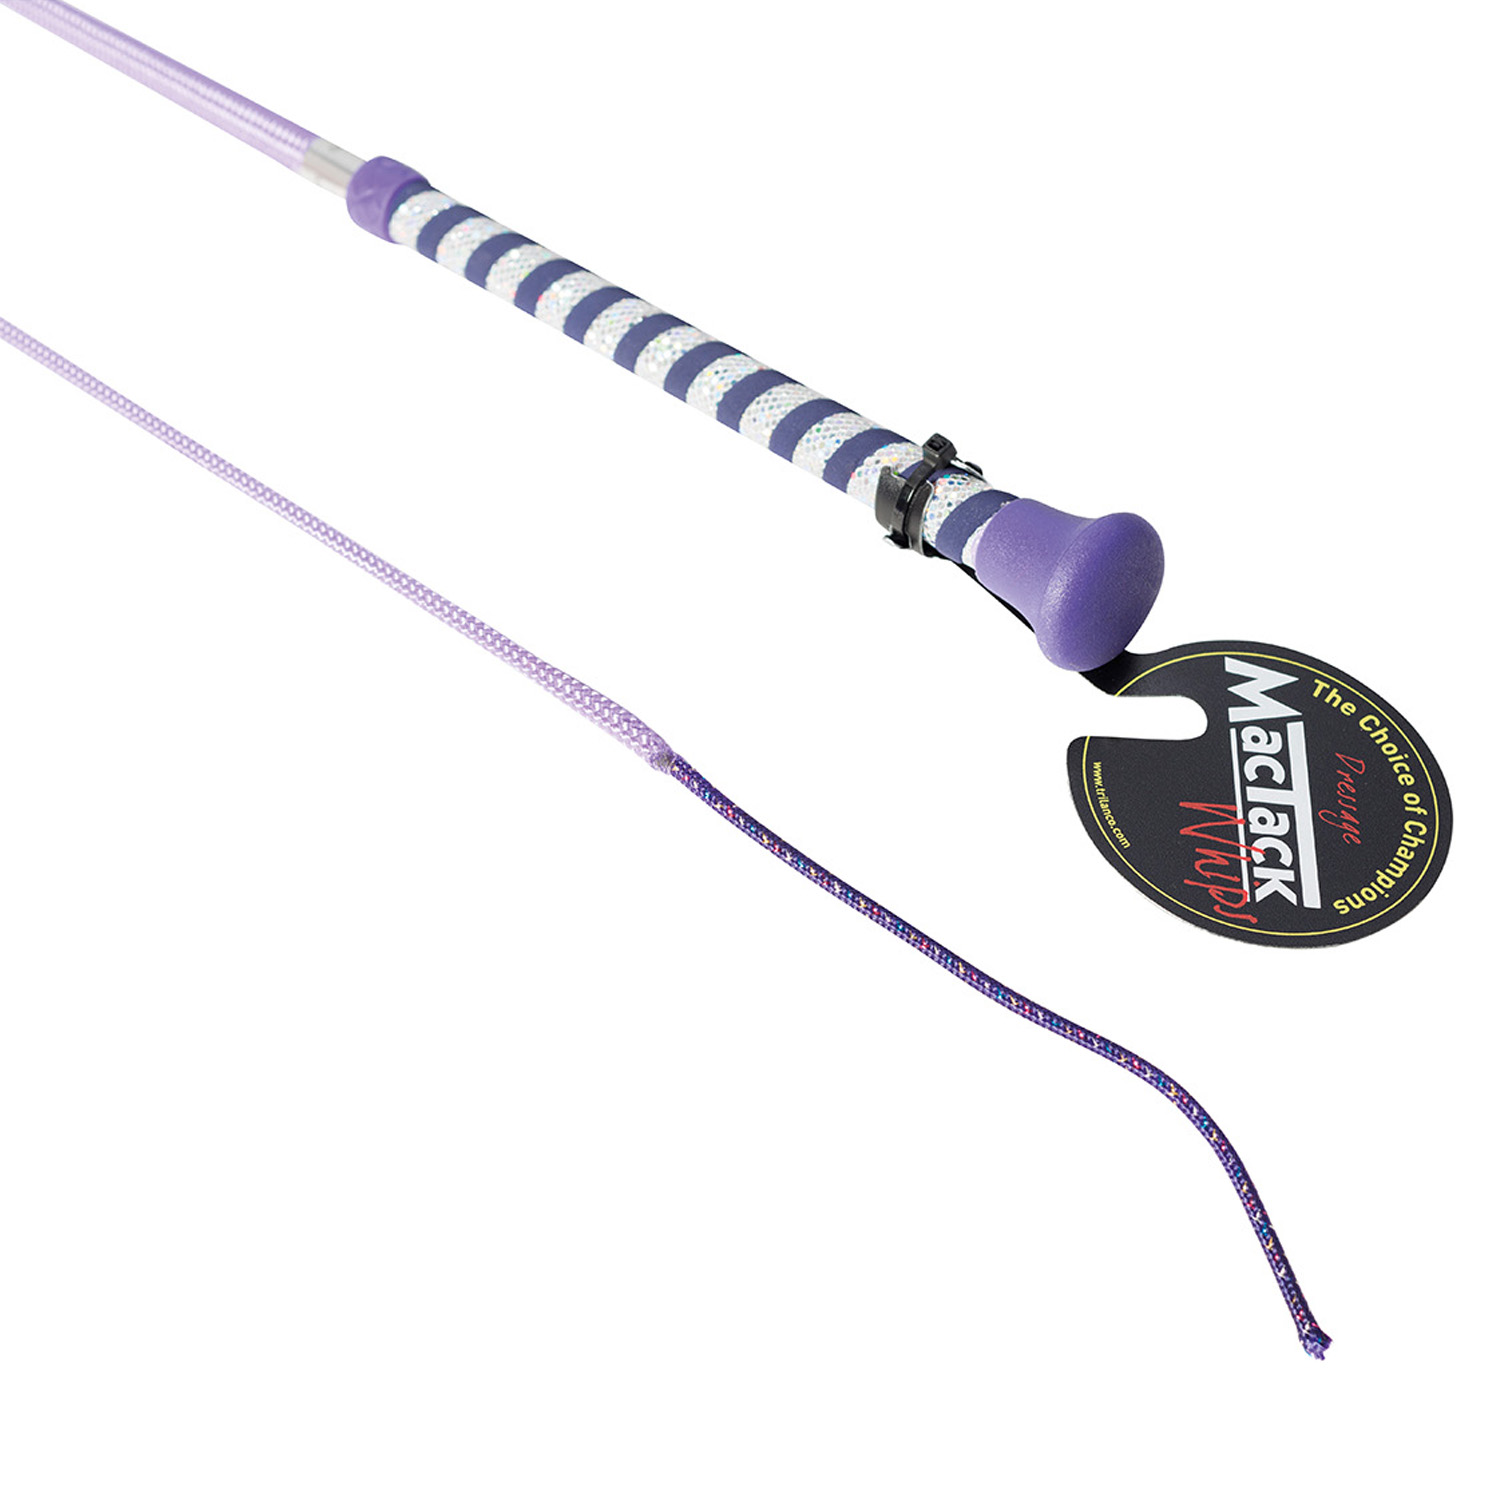 MACTACK DRESSAGE WHIP WITH SILVER GLITTER HANDLE S191 39'' LILAC/PURPLE 39''